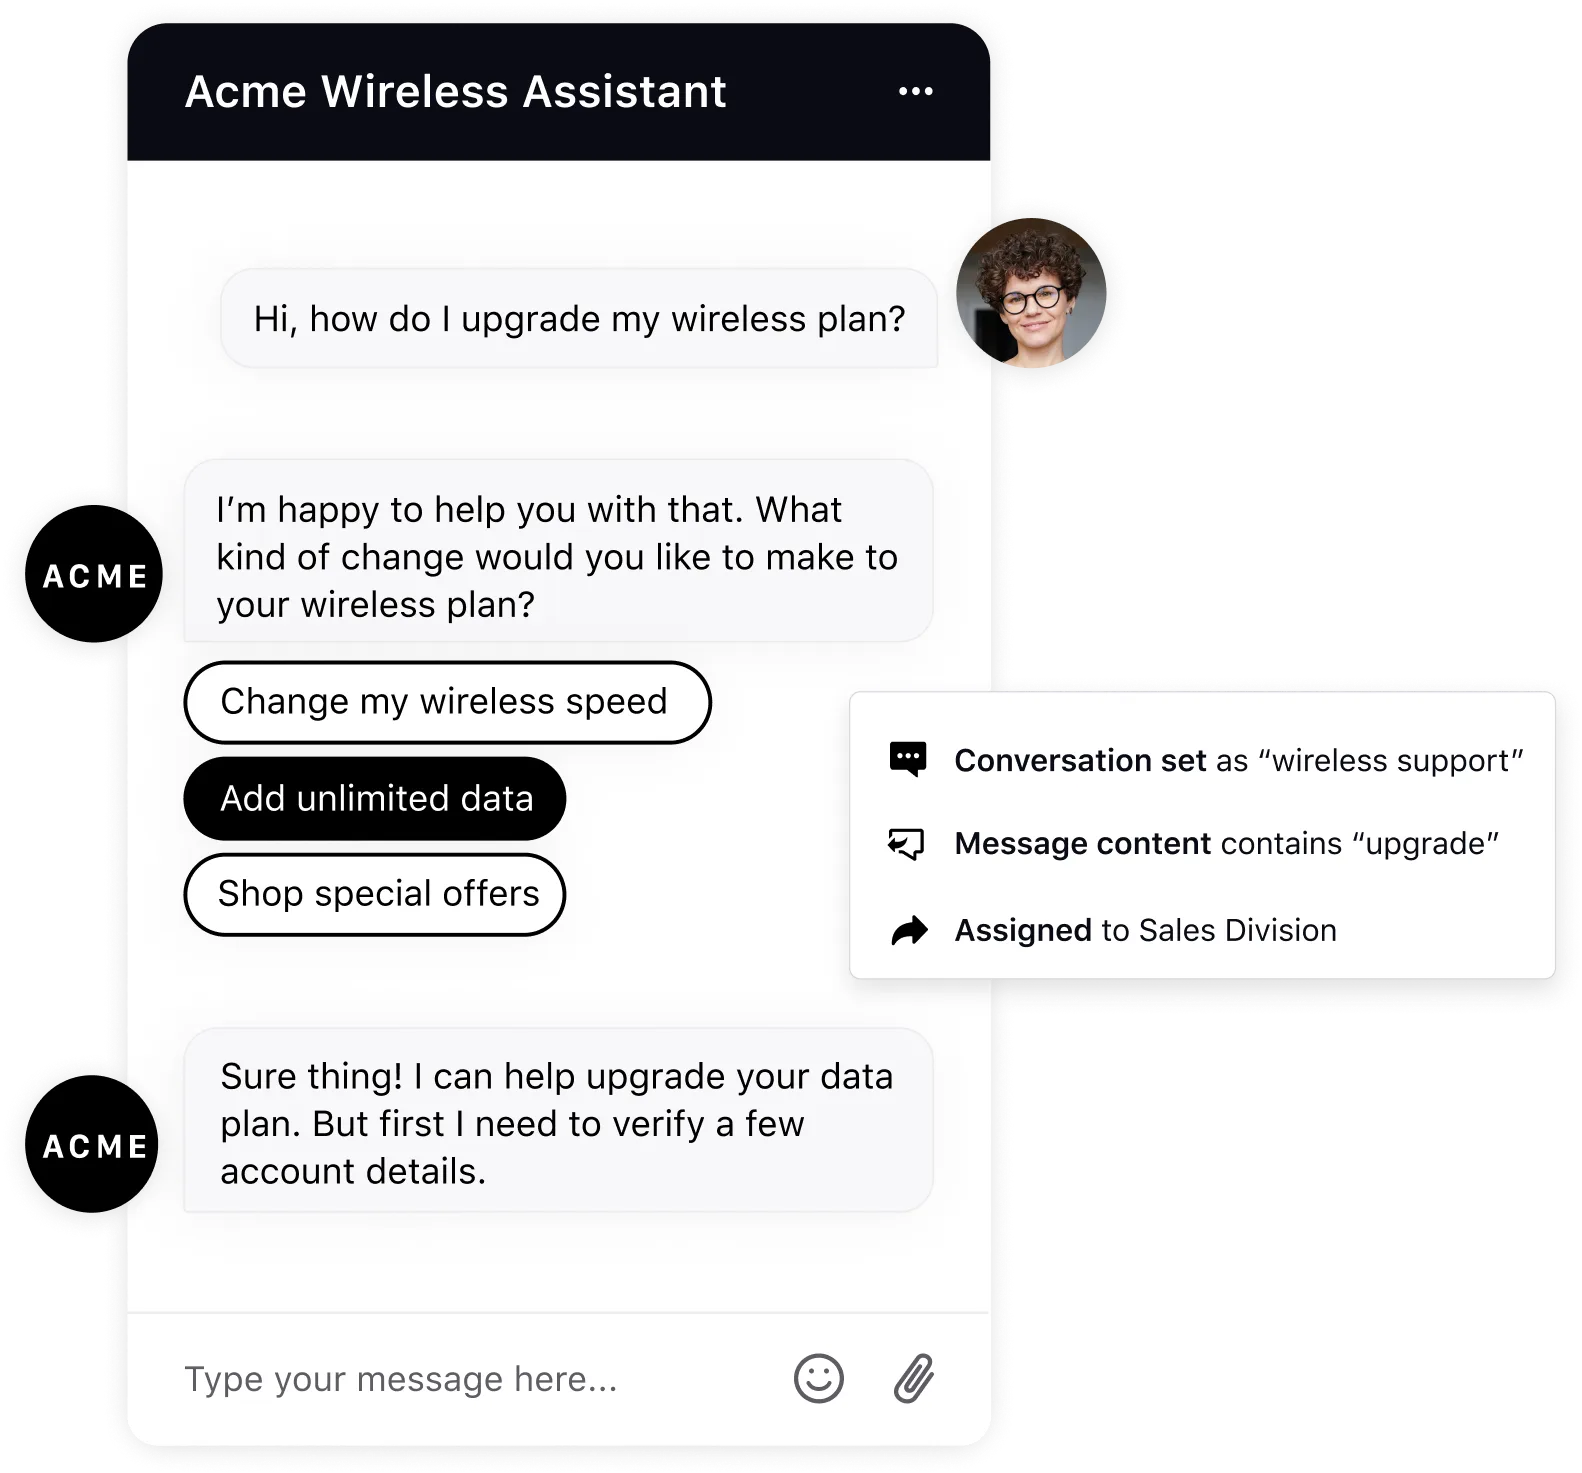 Sprinklr chatbot detects context and intent - benefits of chatbots